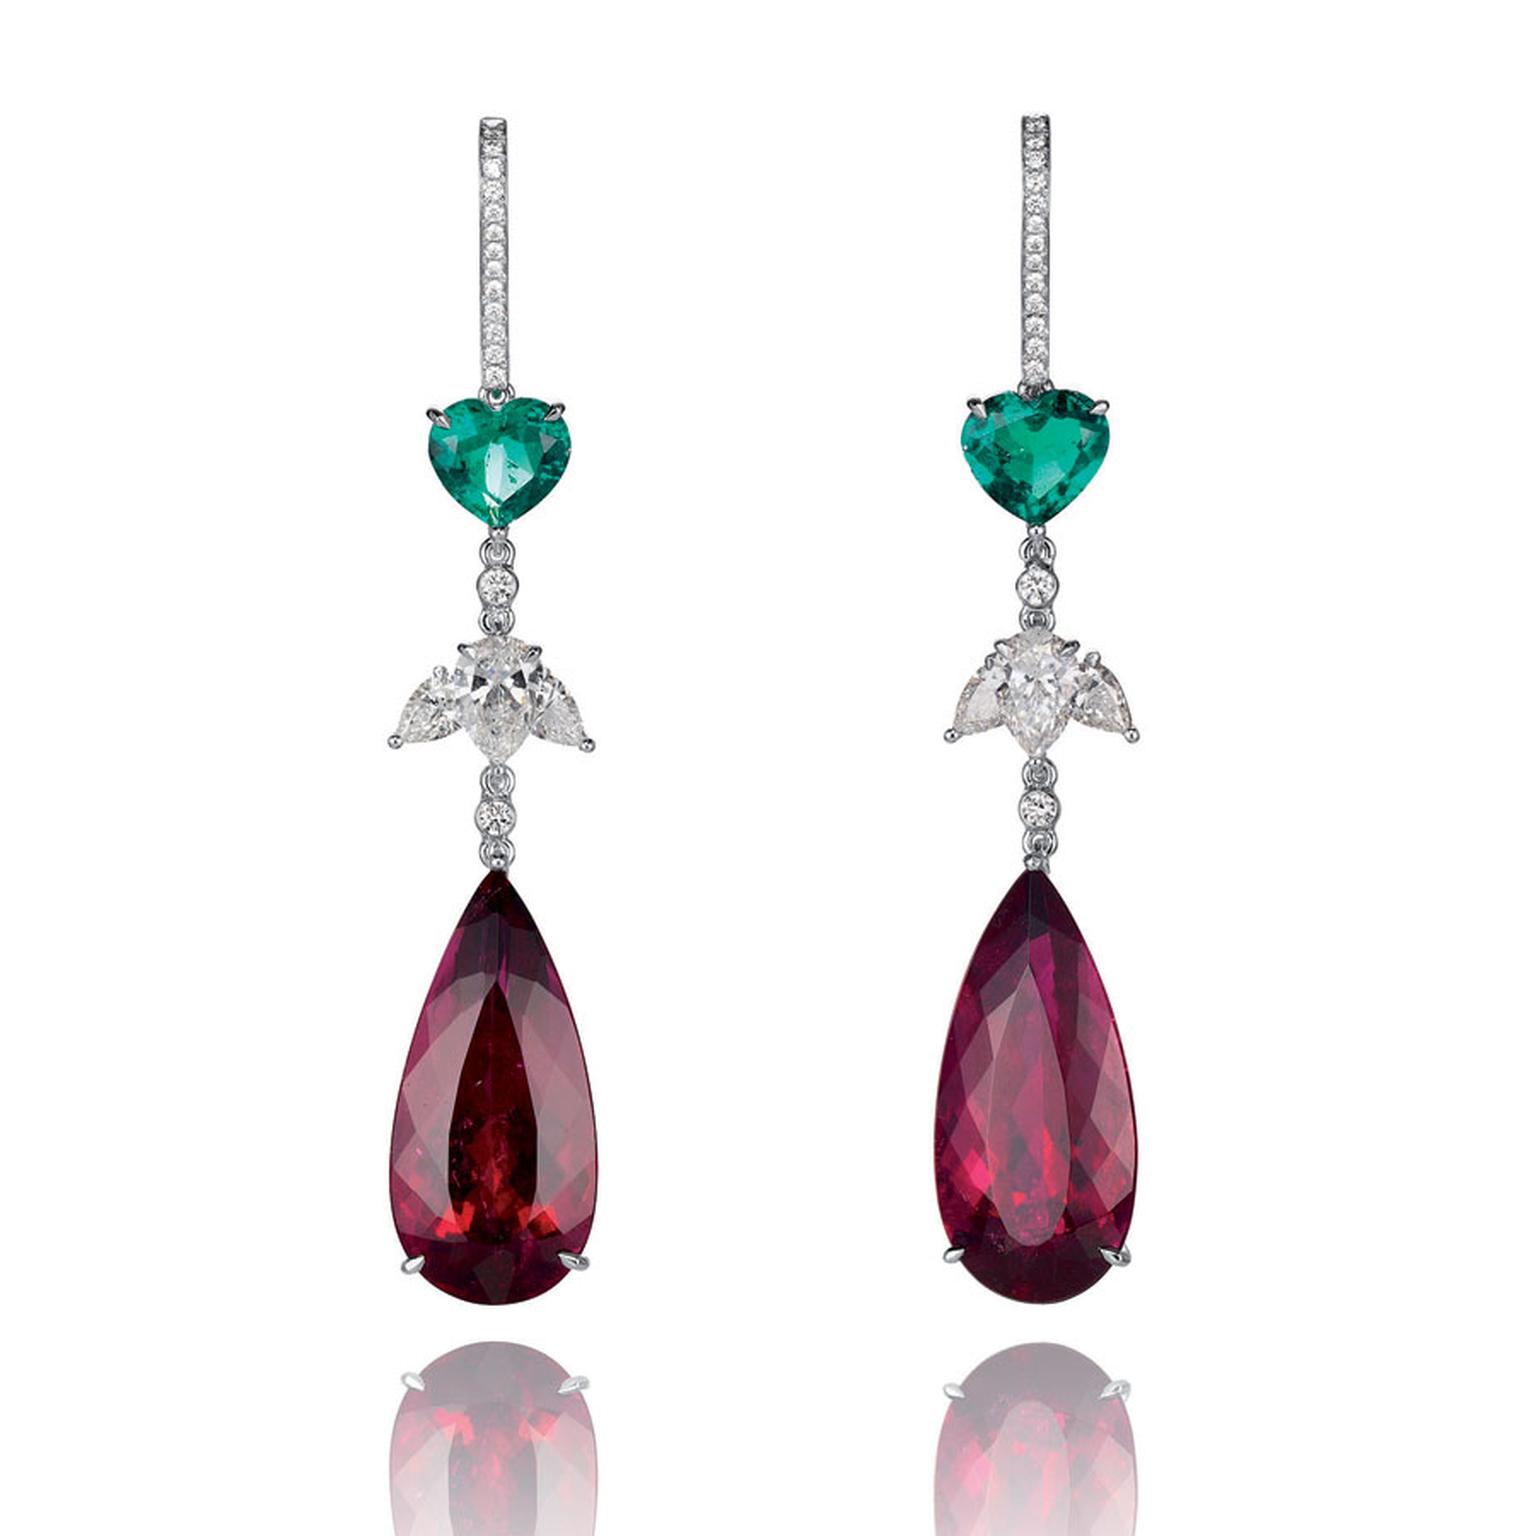 Chopard Chocolate Tempatations Earrings suspending two pear shaped rubellites, adorned with pear shaped emeralds, paved in with diamonds and set in white gold POA